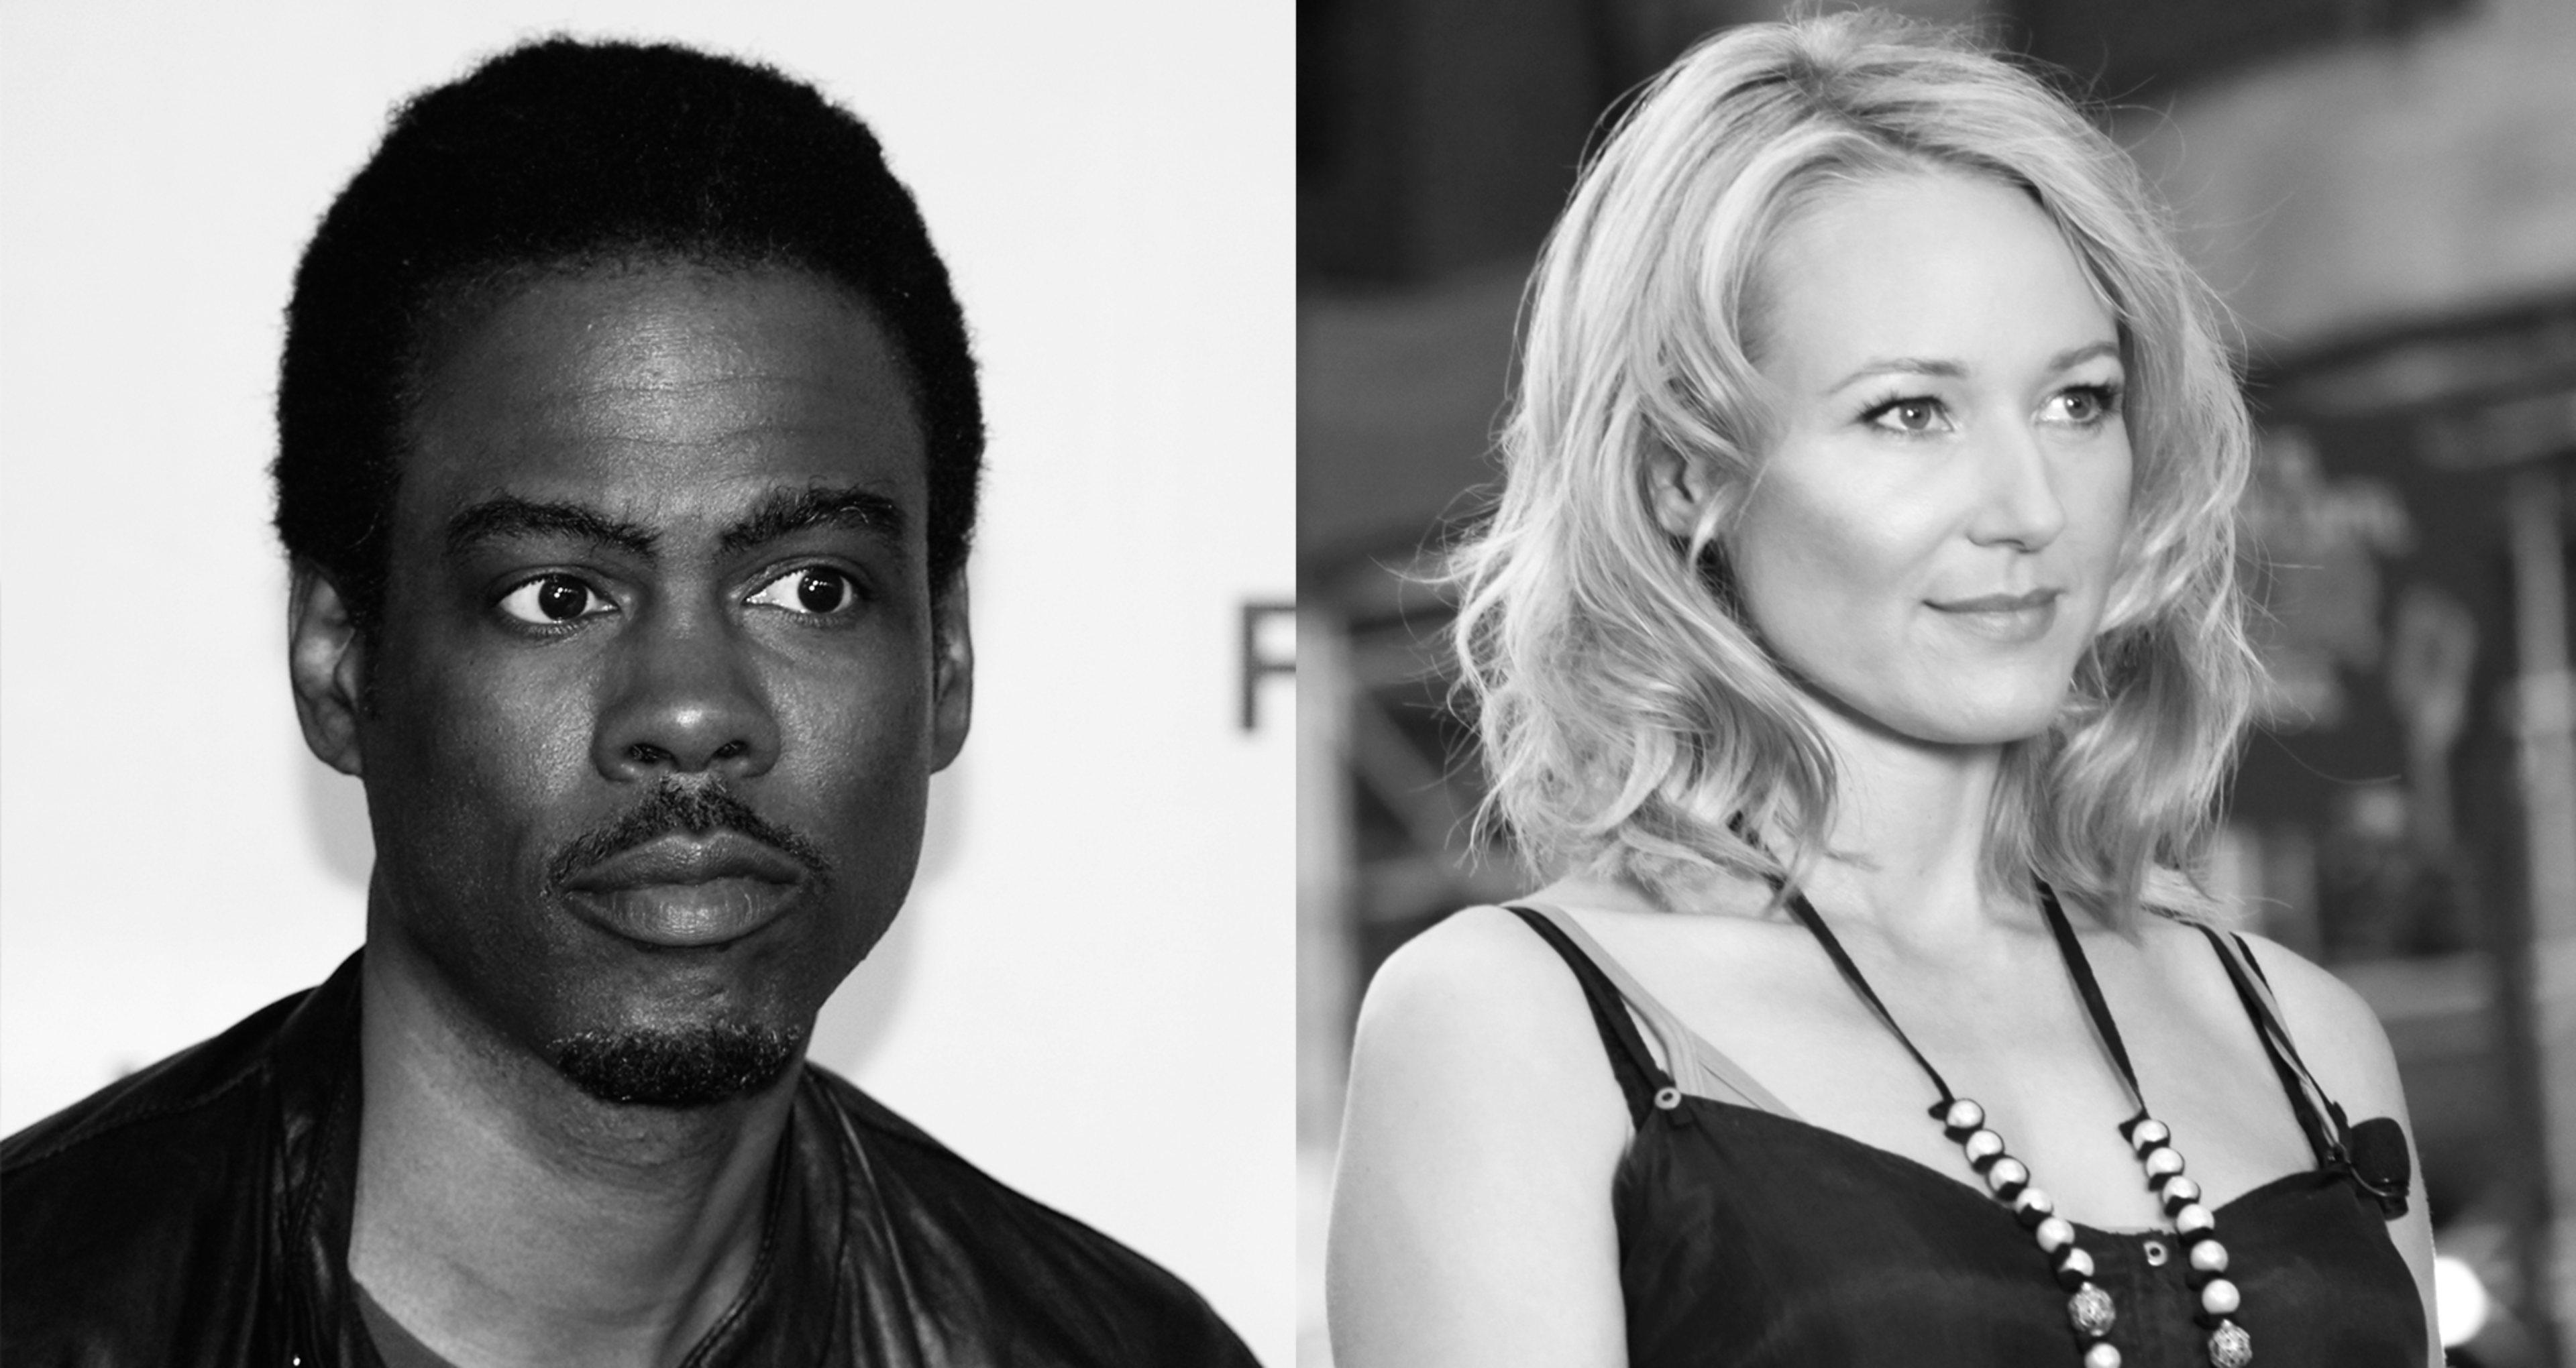 Chris Rock and Jewel endorse San Francisco’s tax to help homeless